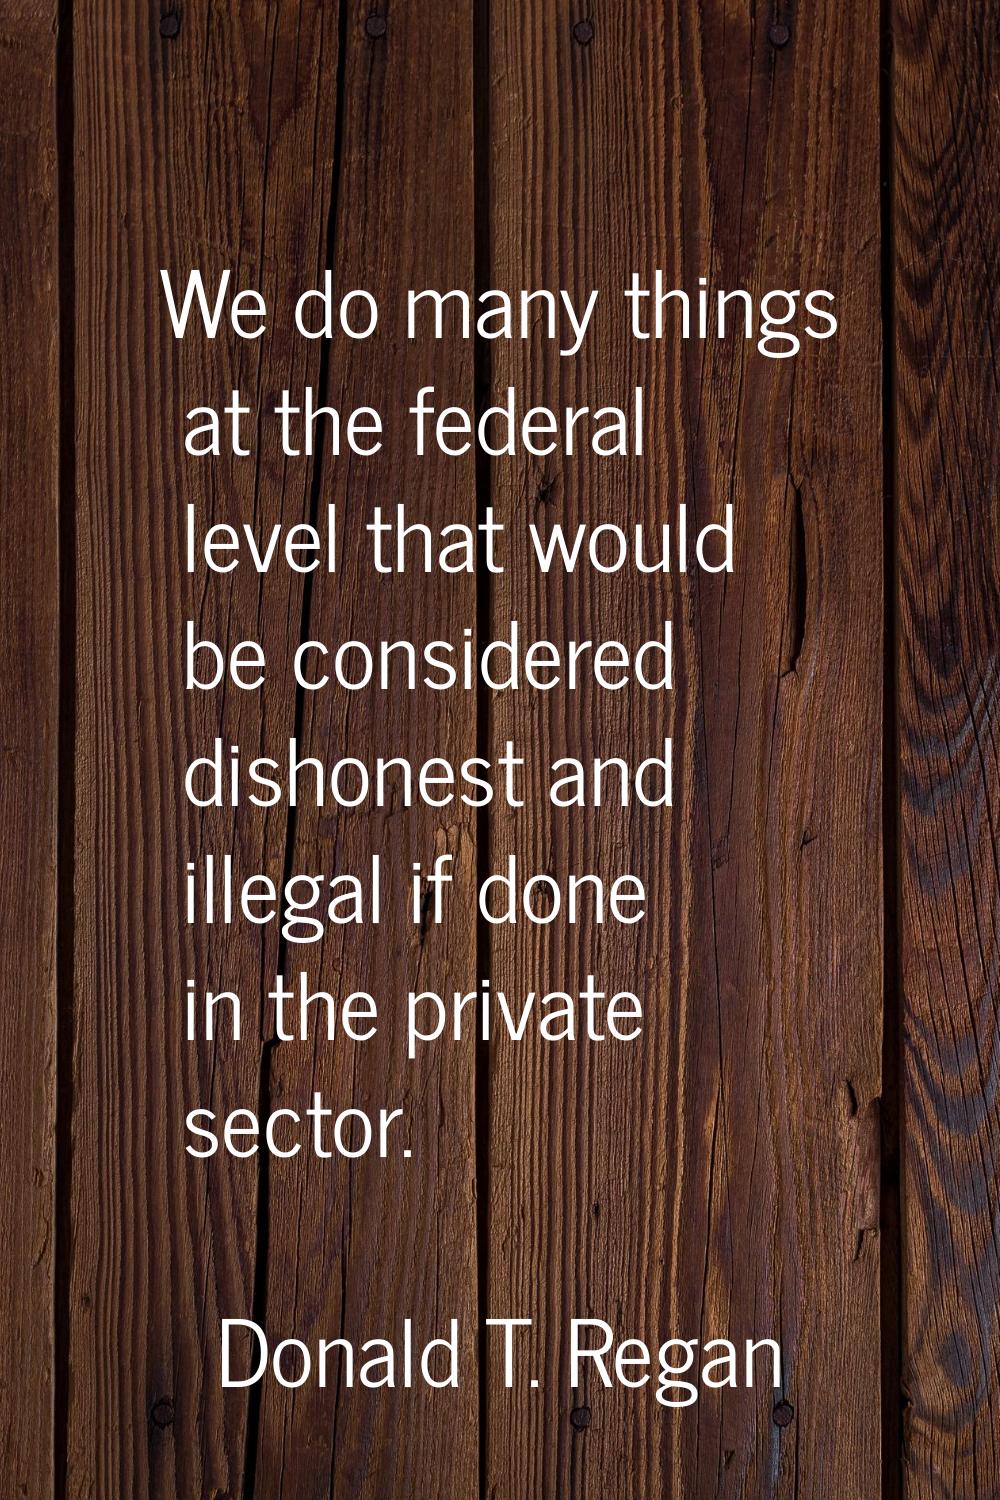 We do many things at the federal level that would be considered dishonest and illegal if done in th